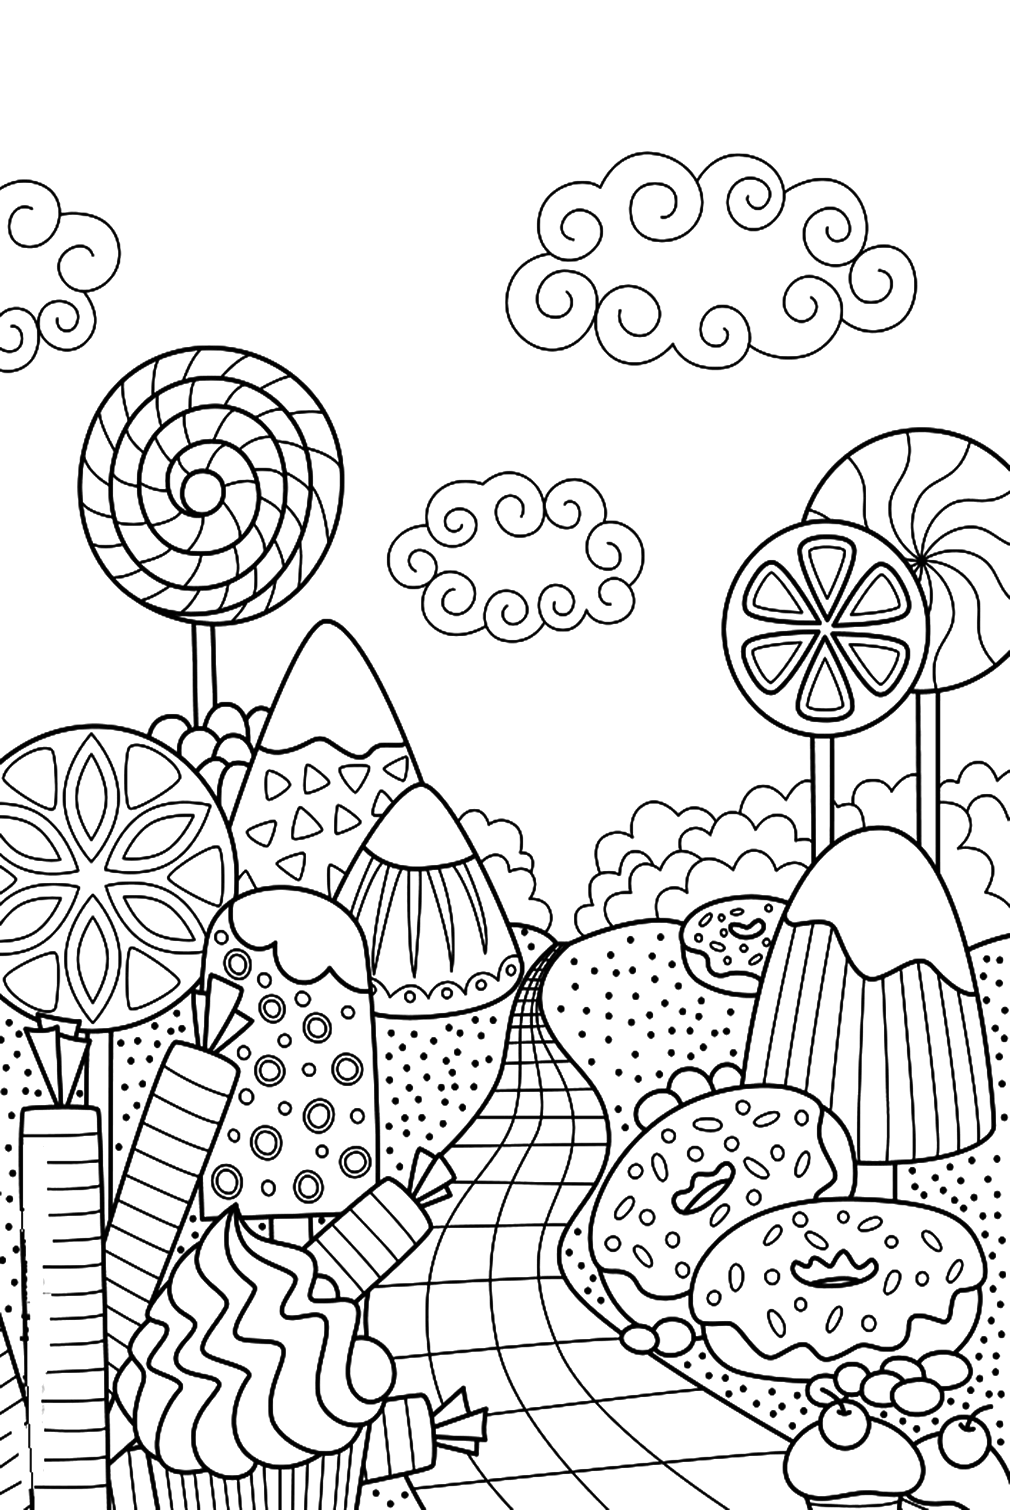 Donut Forest Coloring Page from Donut